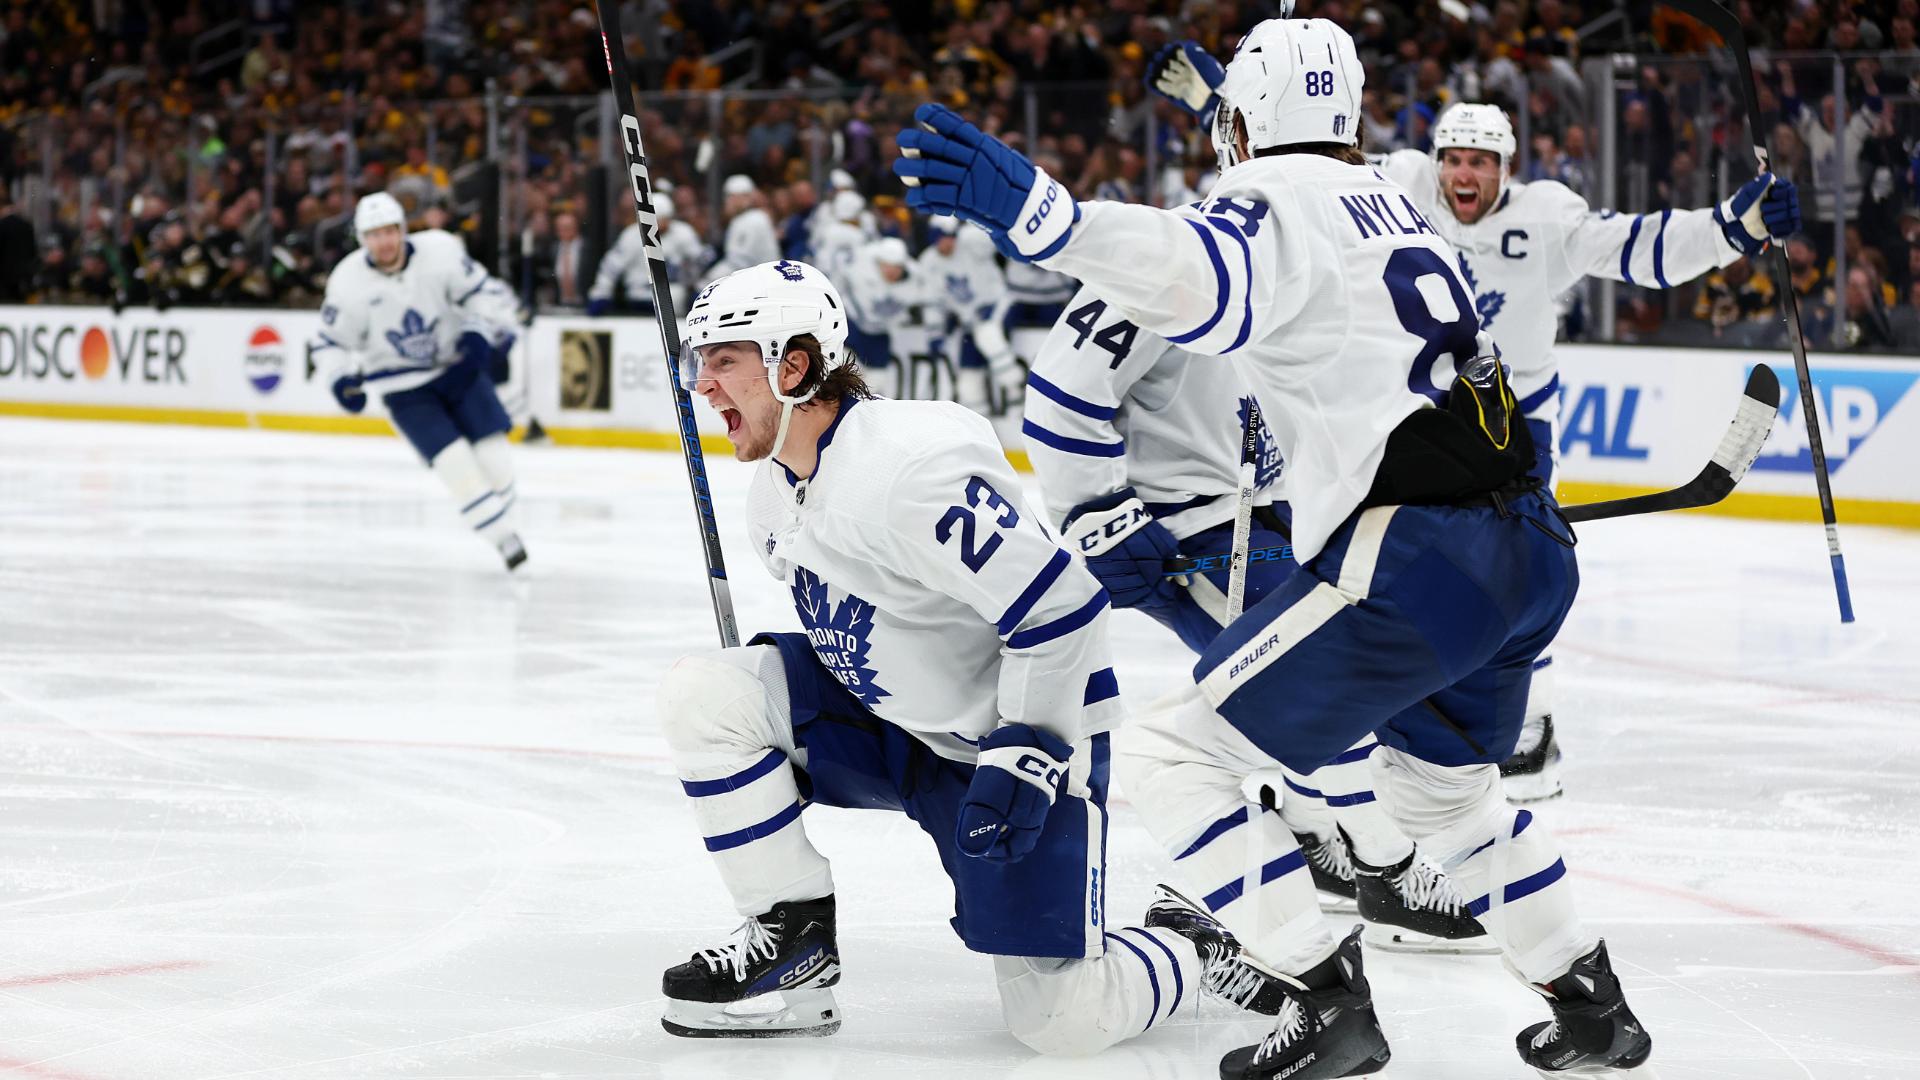 Matthew Knies' OT goal for Maple Leafs forces Game 6 vs. the Bruins